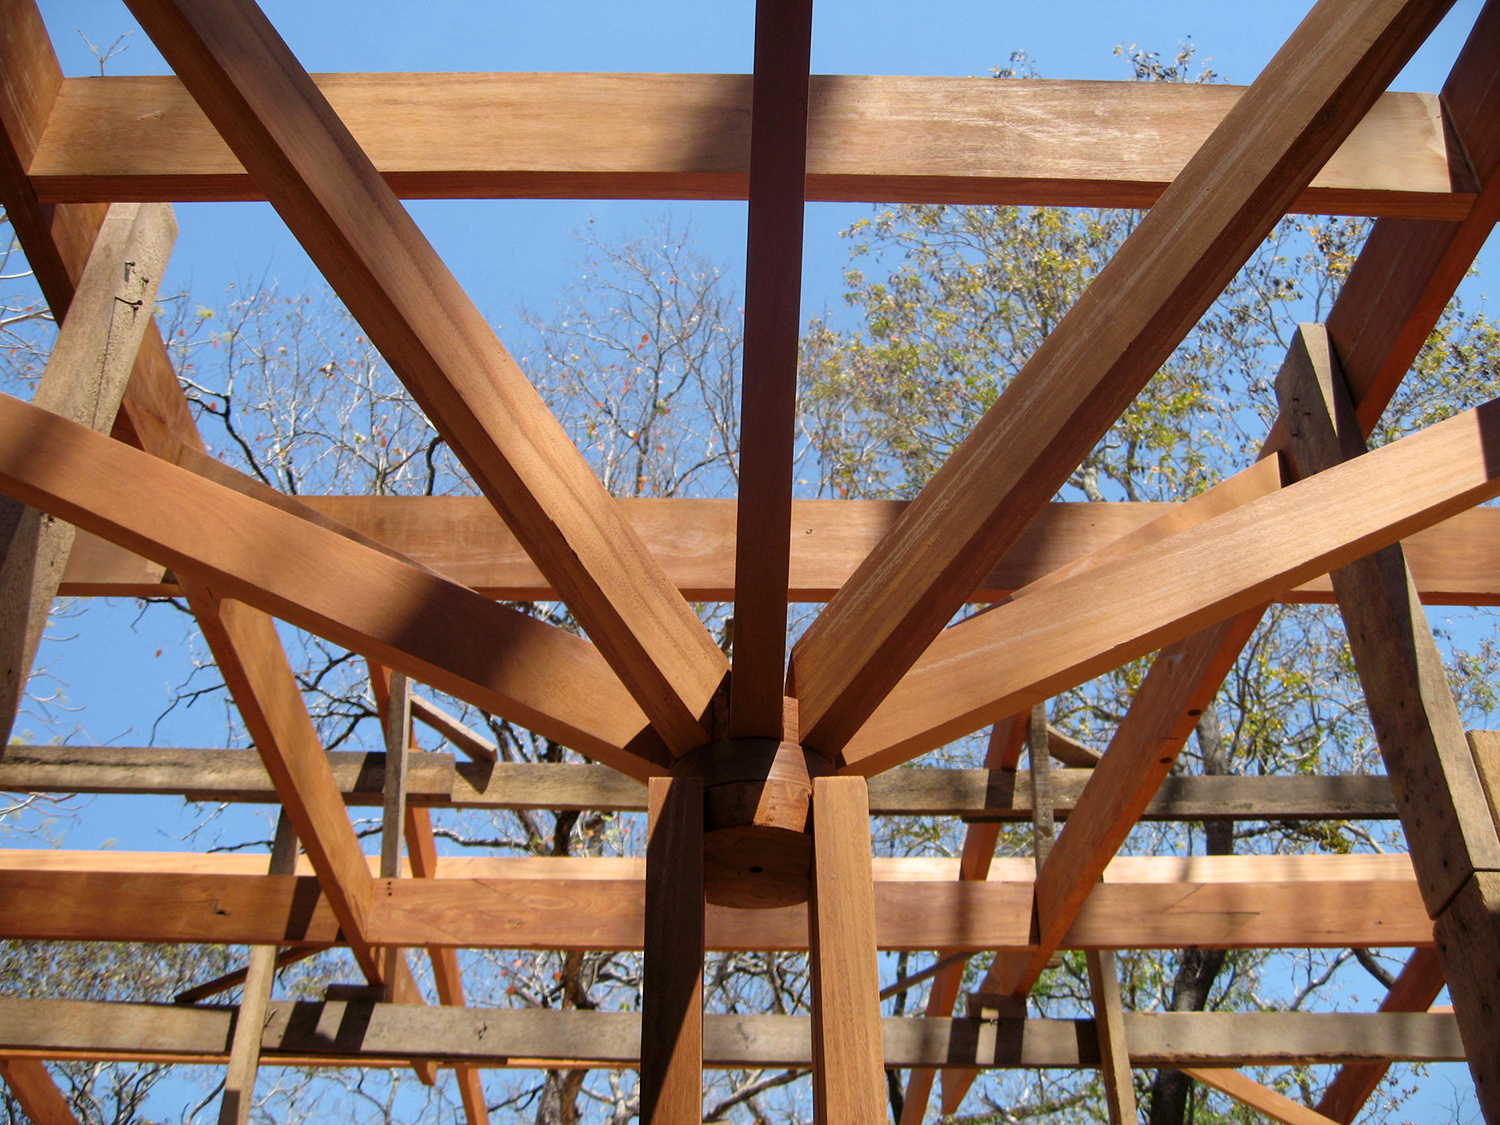 Structural “trees” that hold up the pergolas and the roofs  